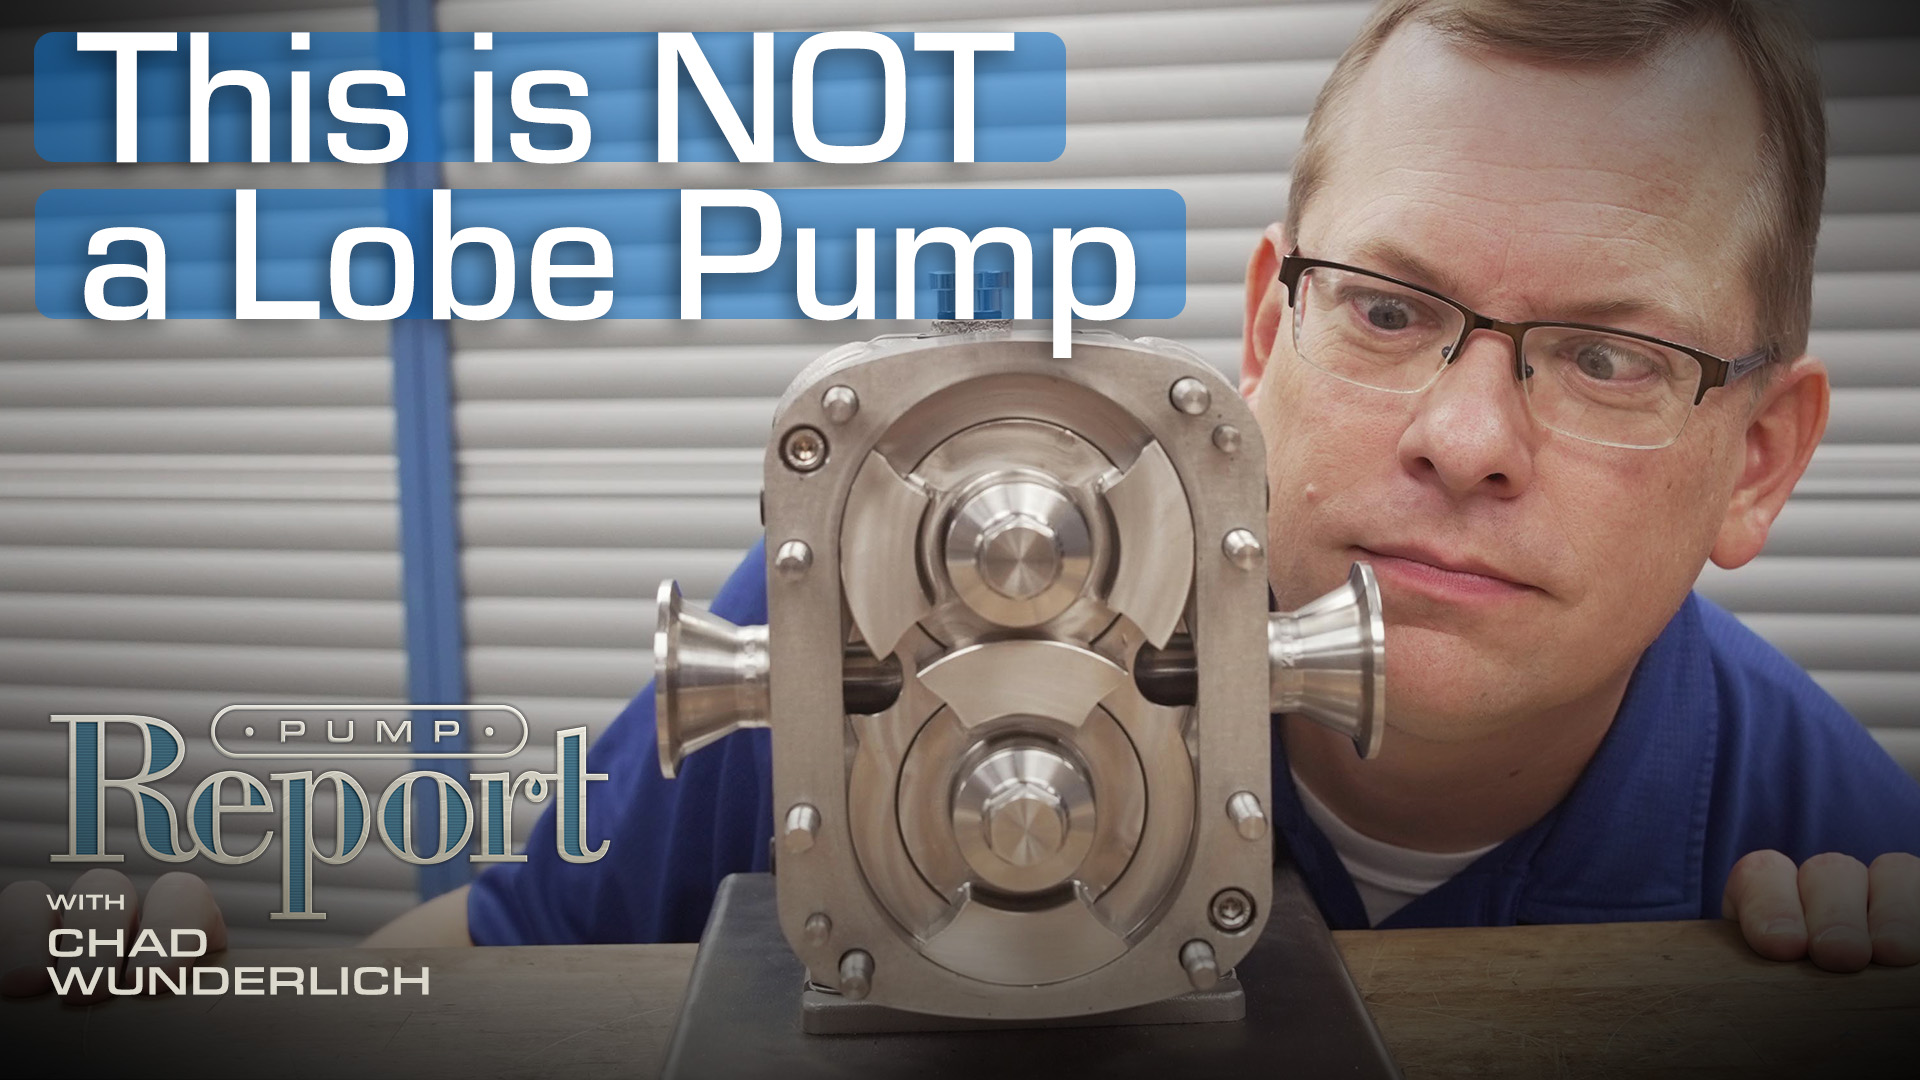 This is NOT a lobe pump